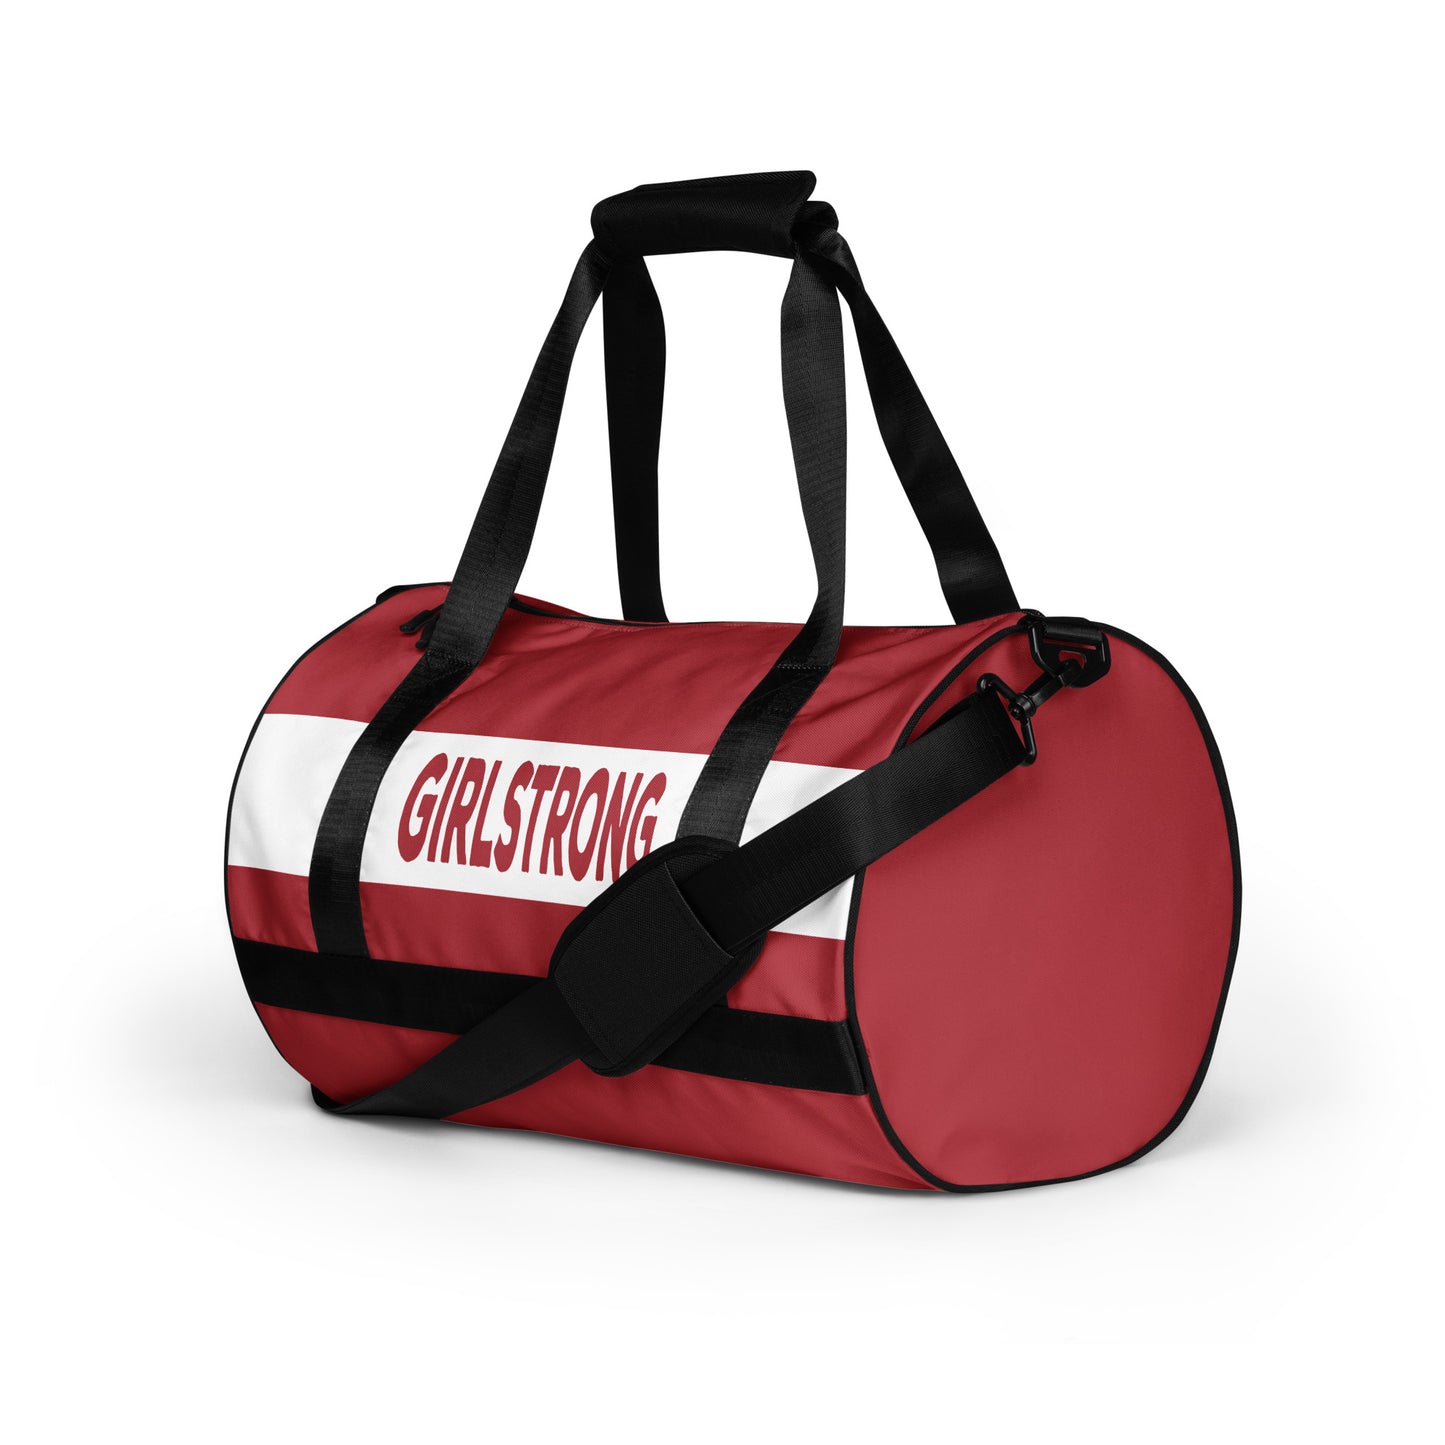 THE BETTY BAG, LIFEGUARD RED